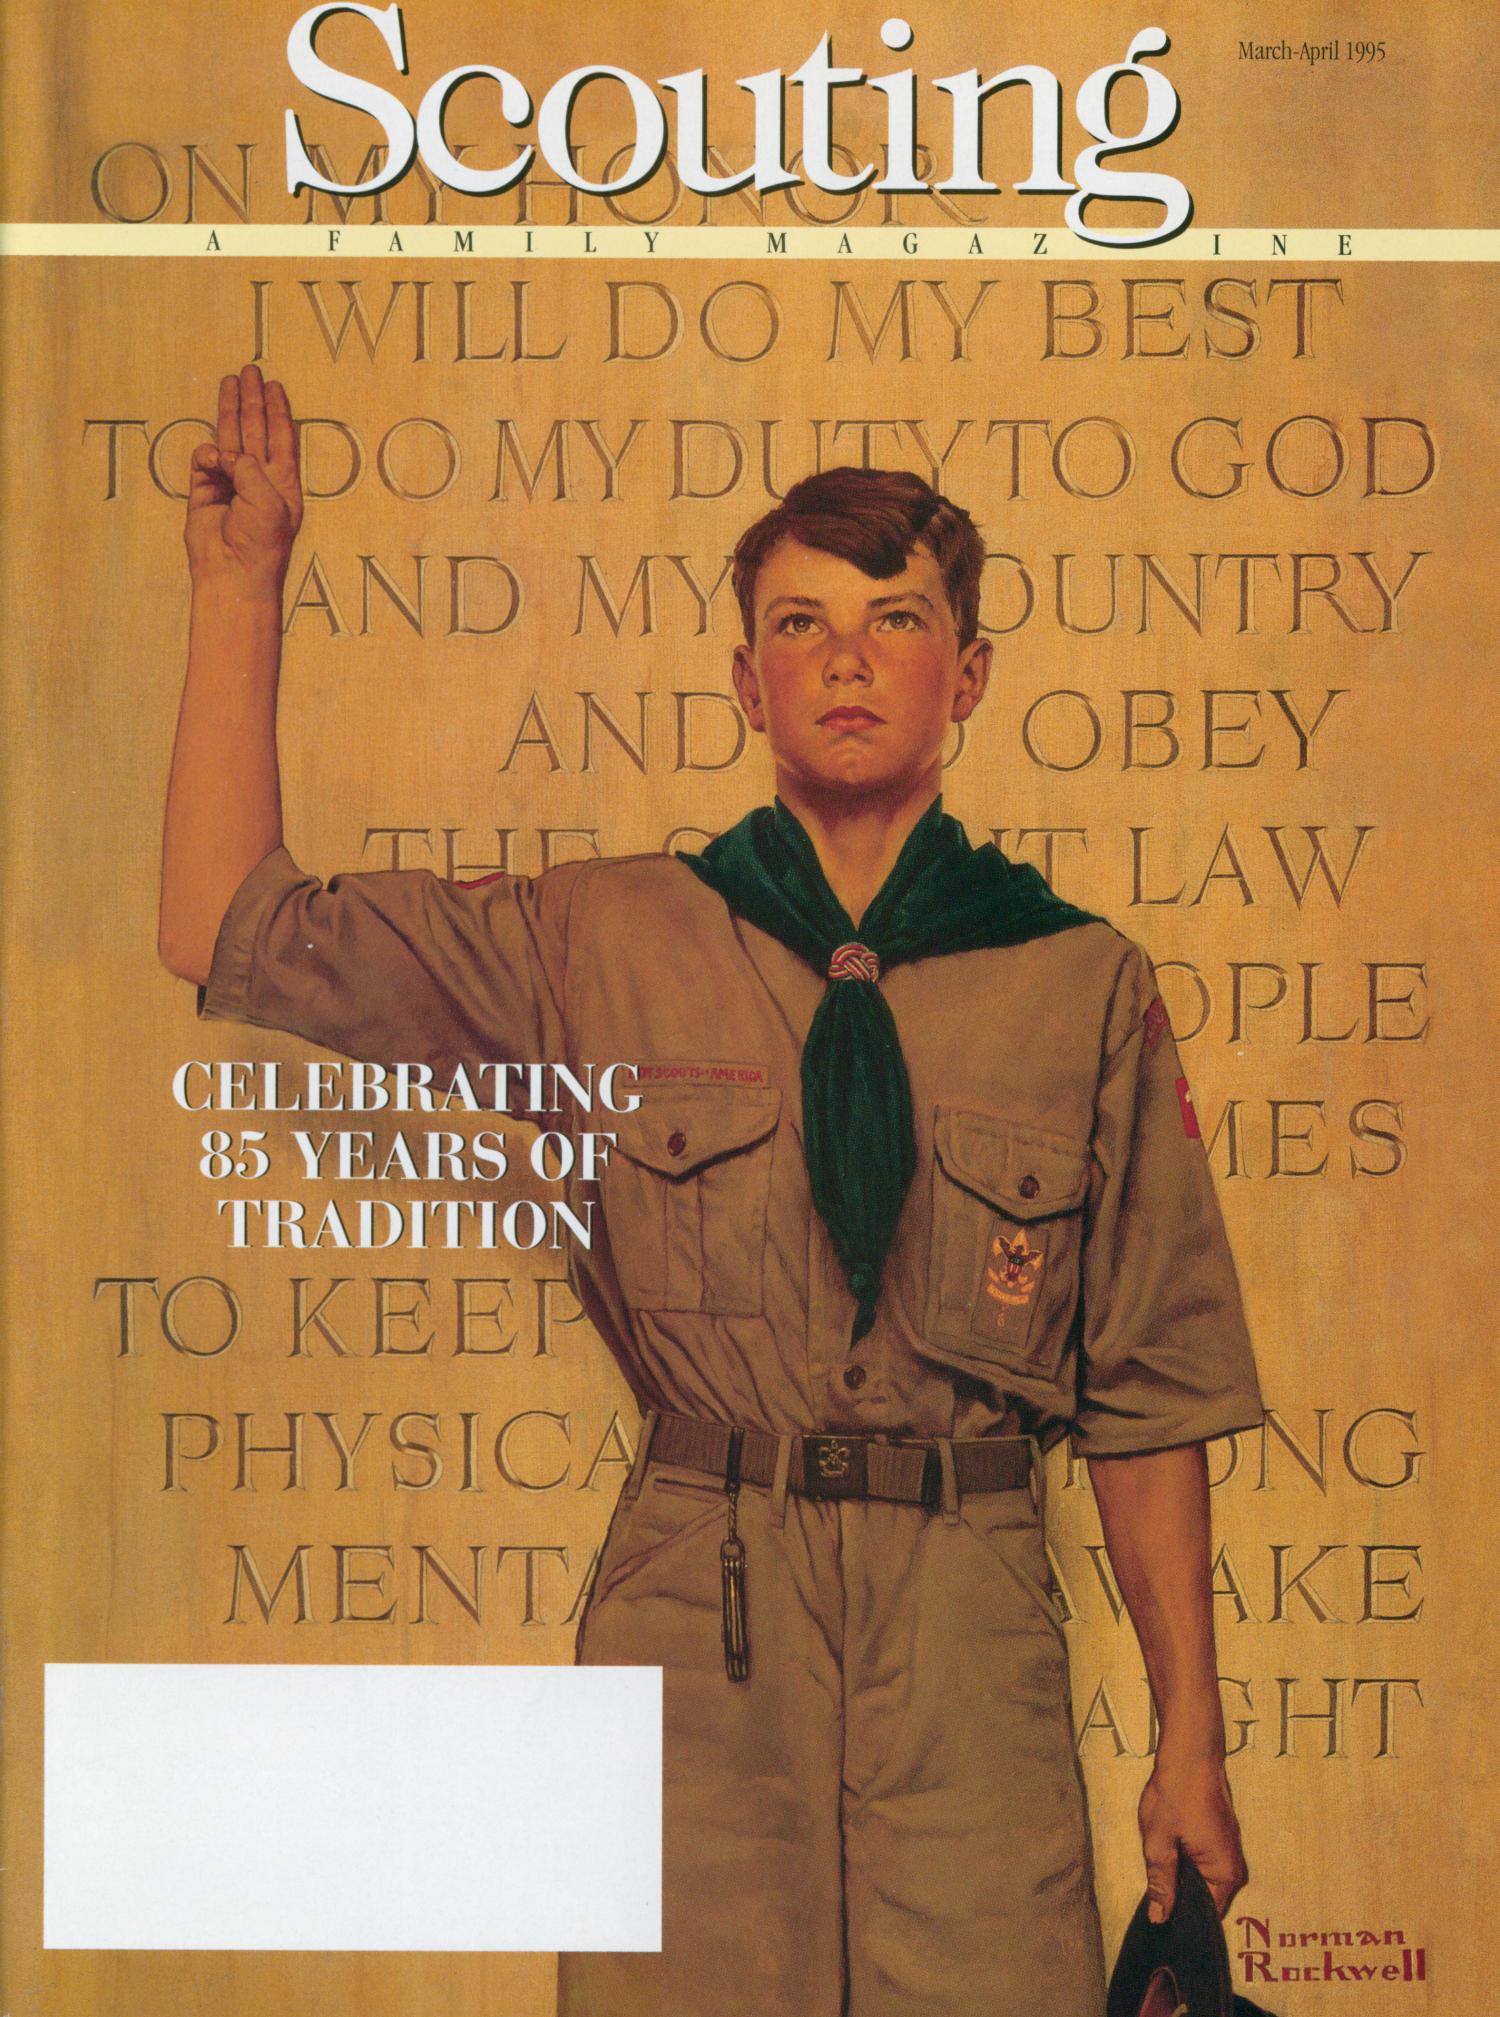 Scouting, Volume 83, Number 2, March-April 1995
                                                
                                                    Front Cover
                                                